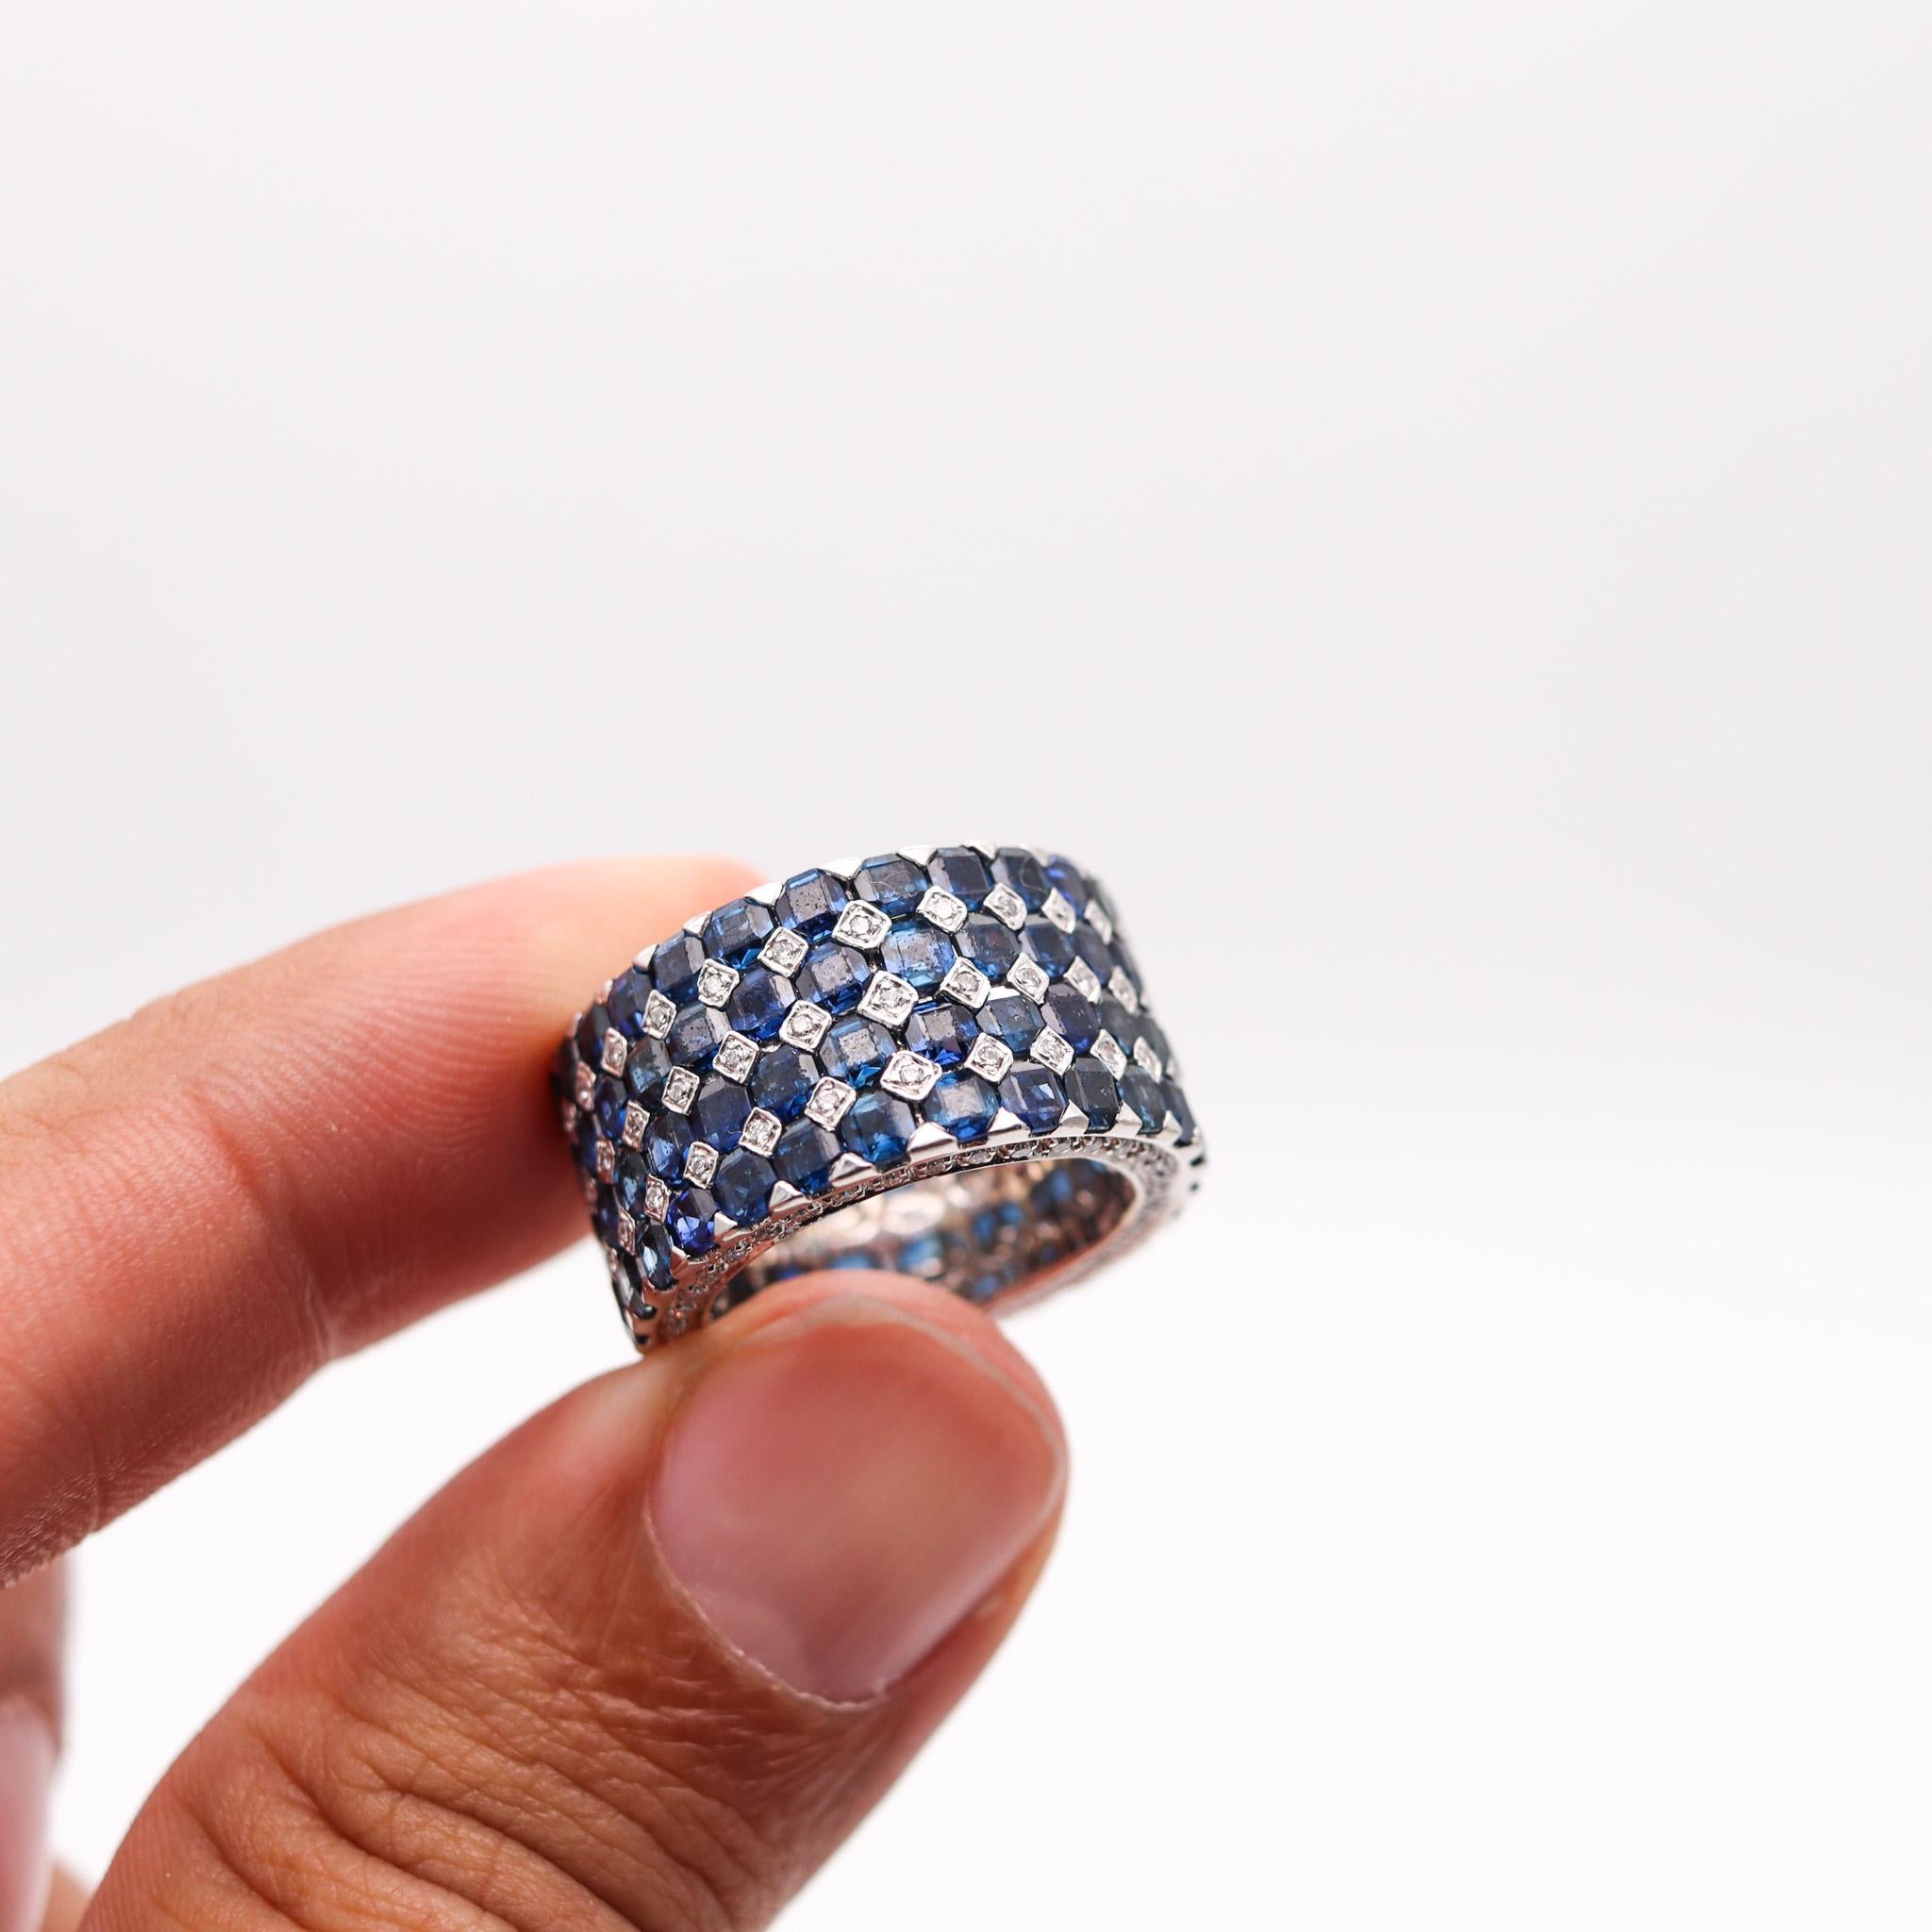 Princess Cut Eternity Band Ring in 14 Kt White Gold with 8.41 Ctw in Sapphires and Diamonds For Sale